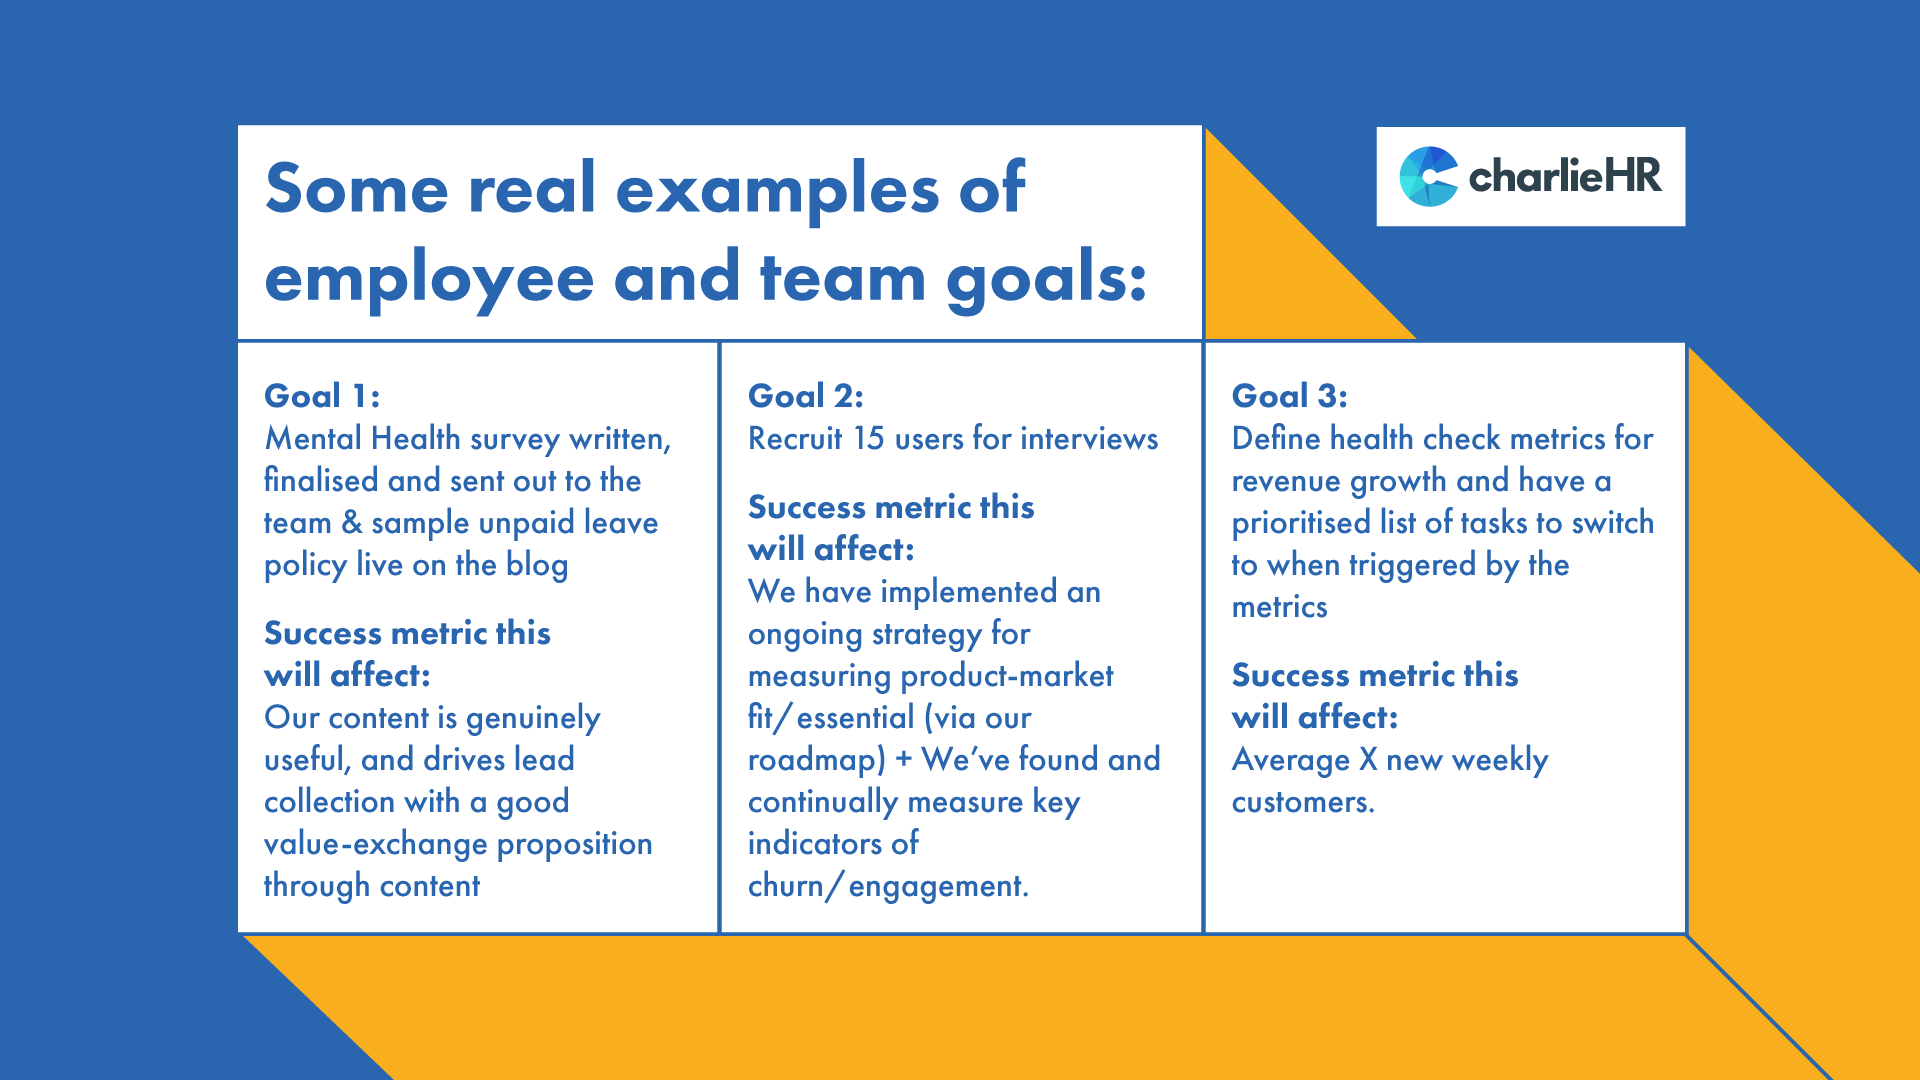 Some real examples of employee and team goals